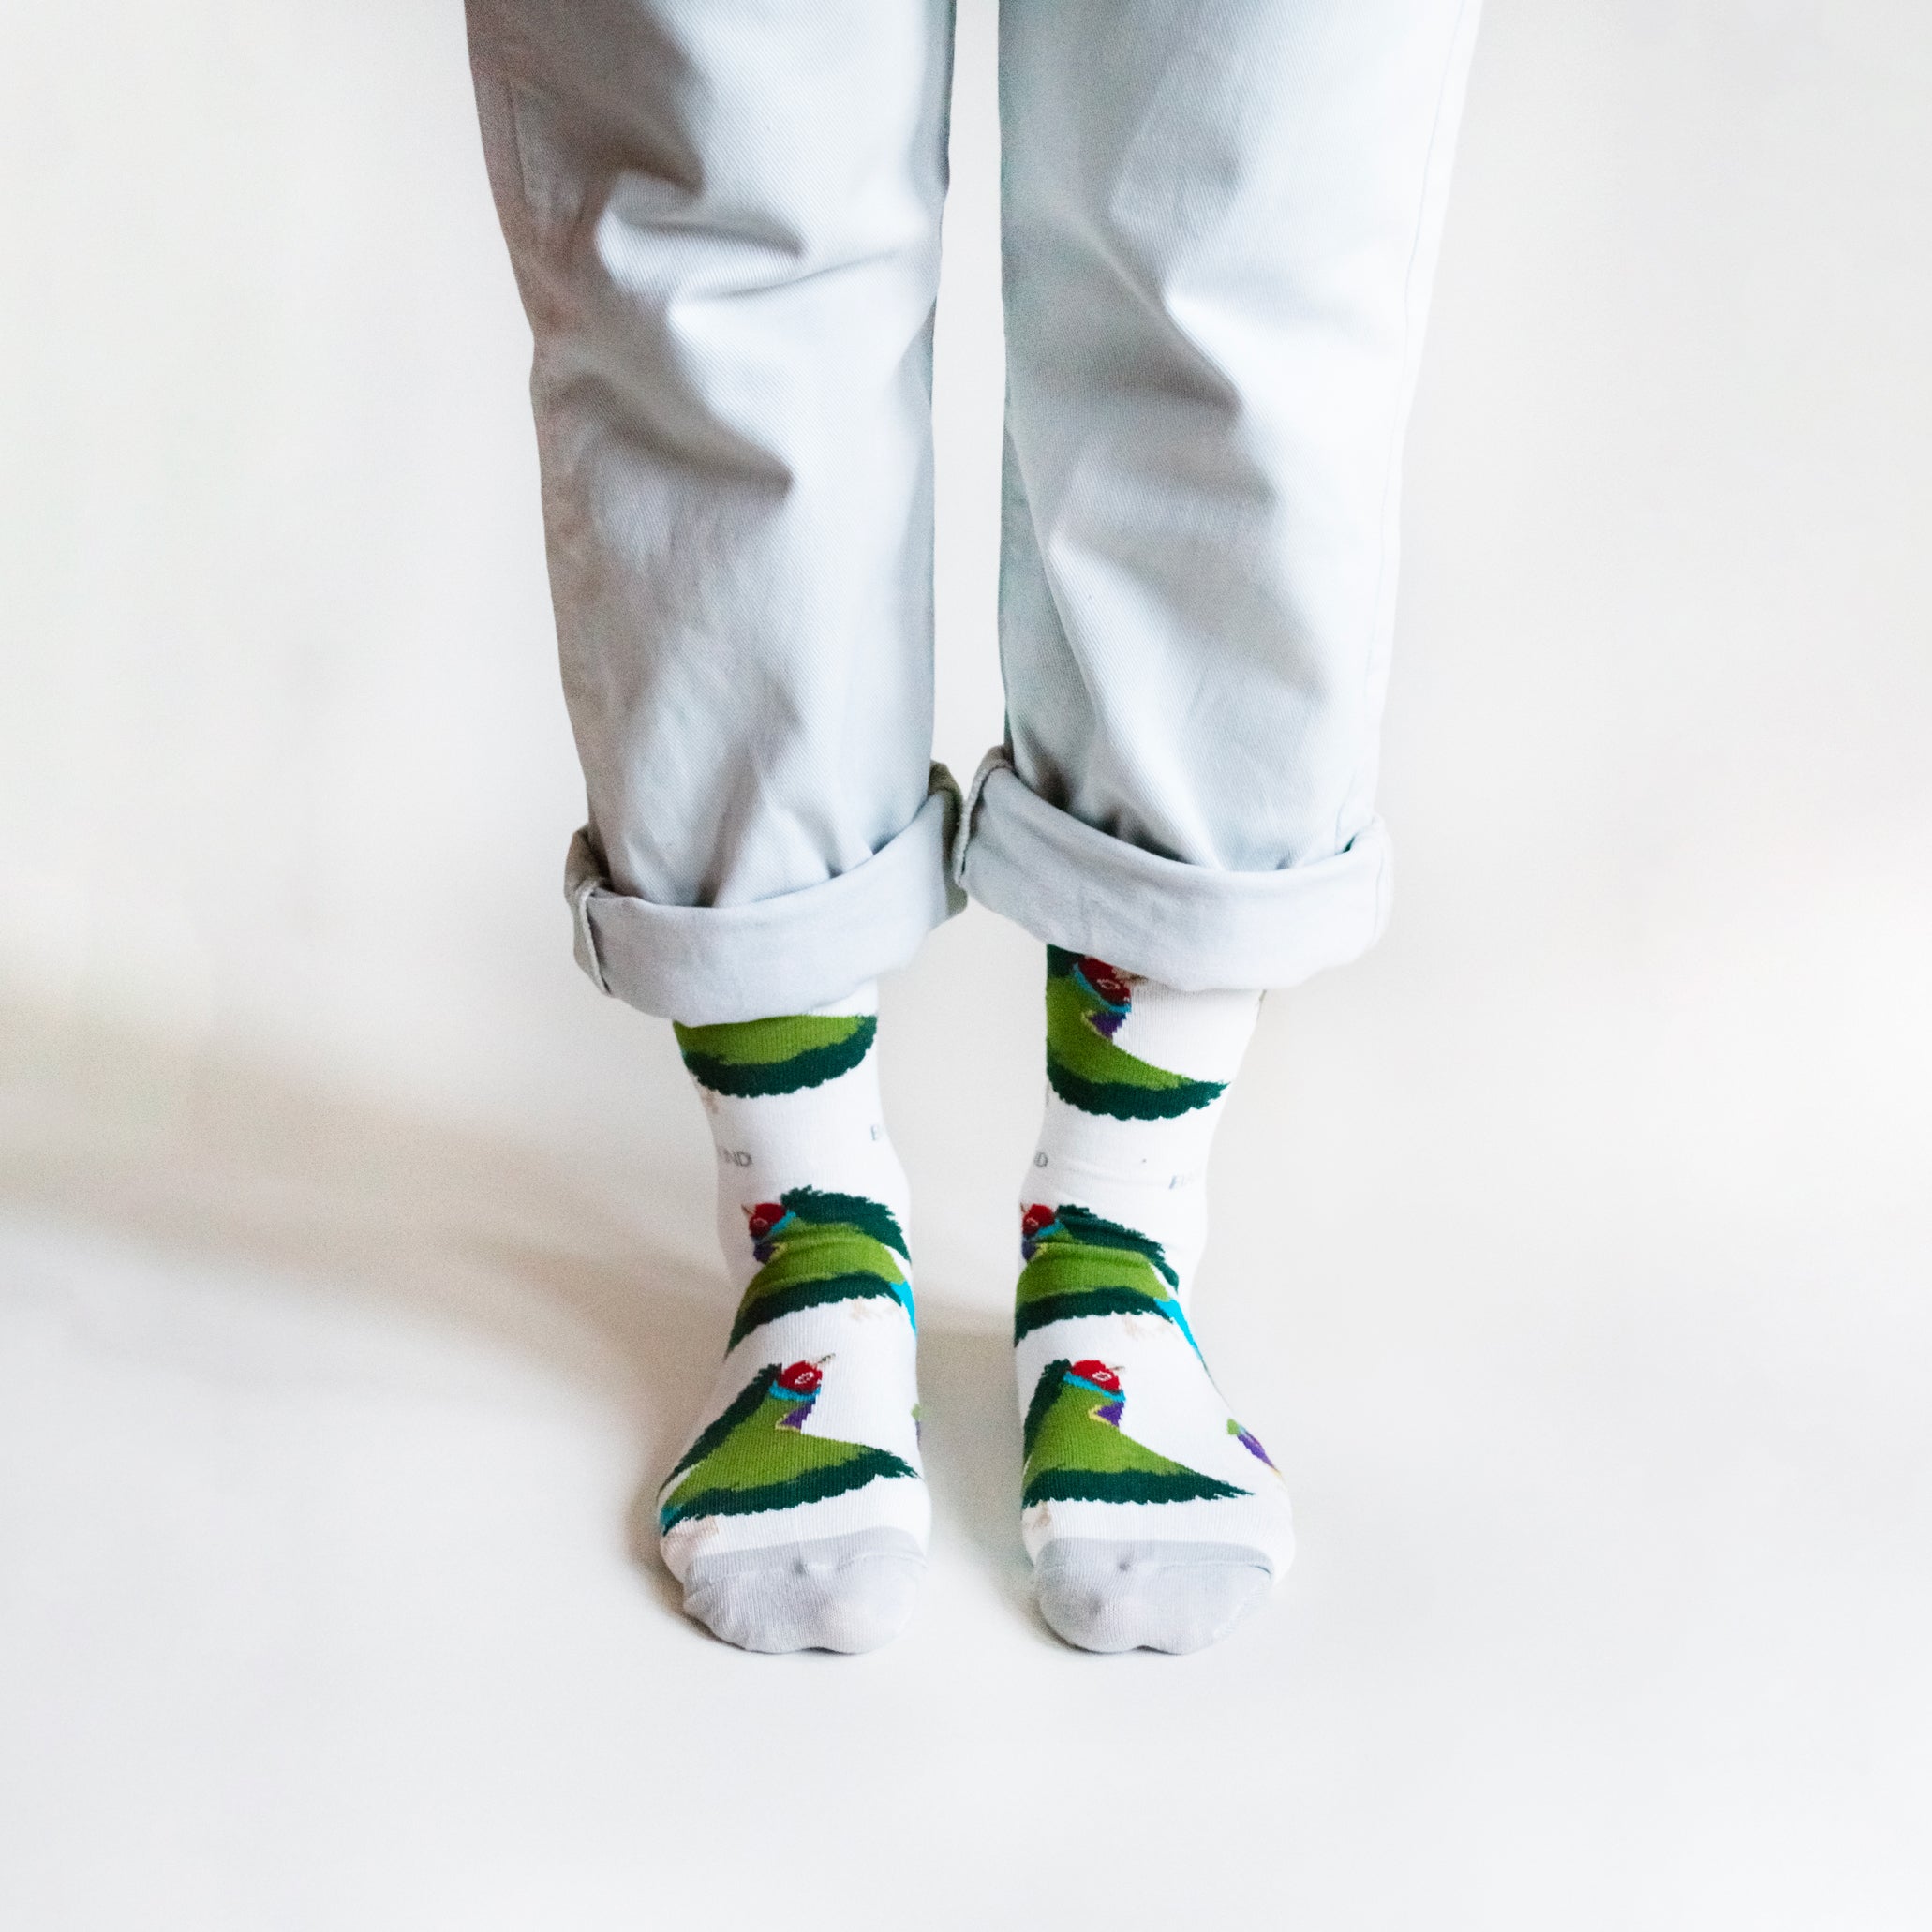 Save The Gouldian Finches Bamboo Socks